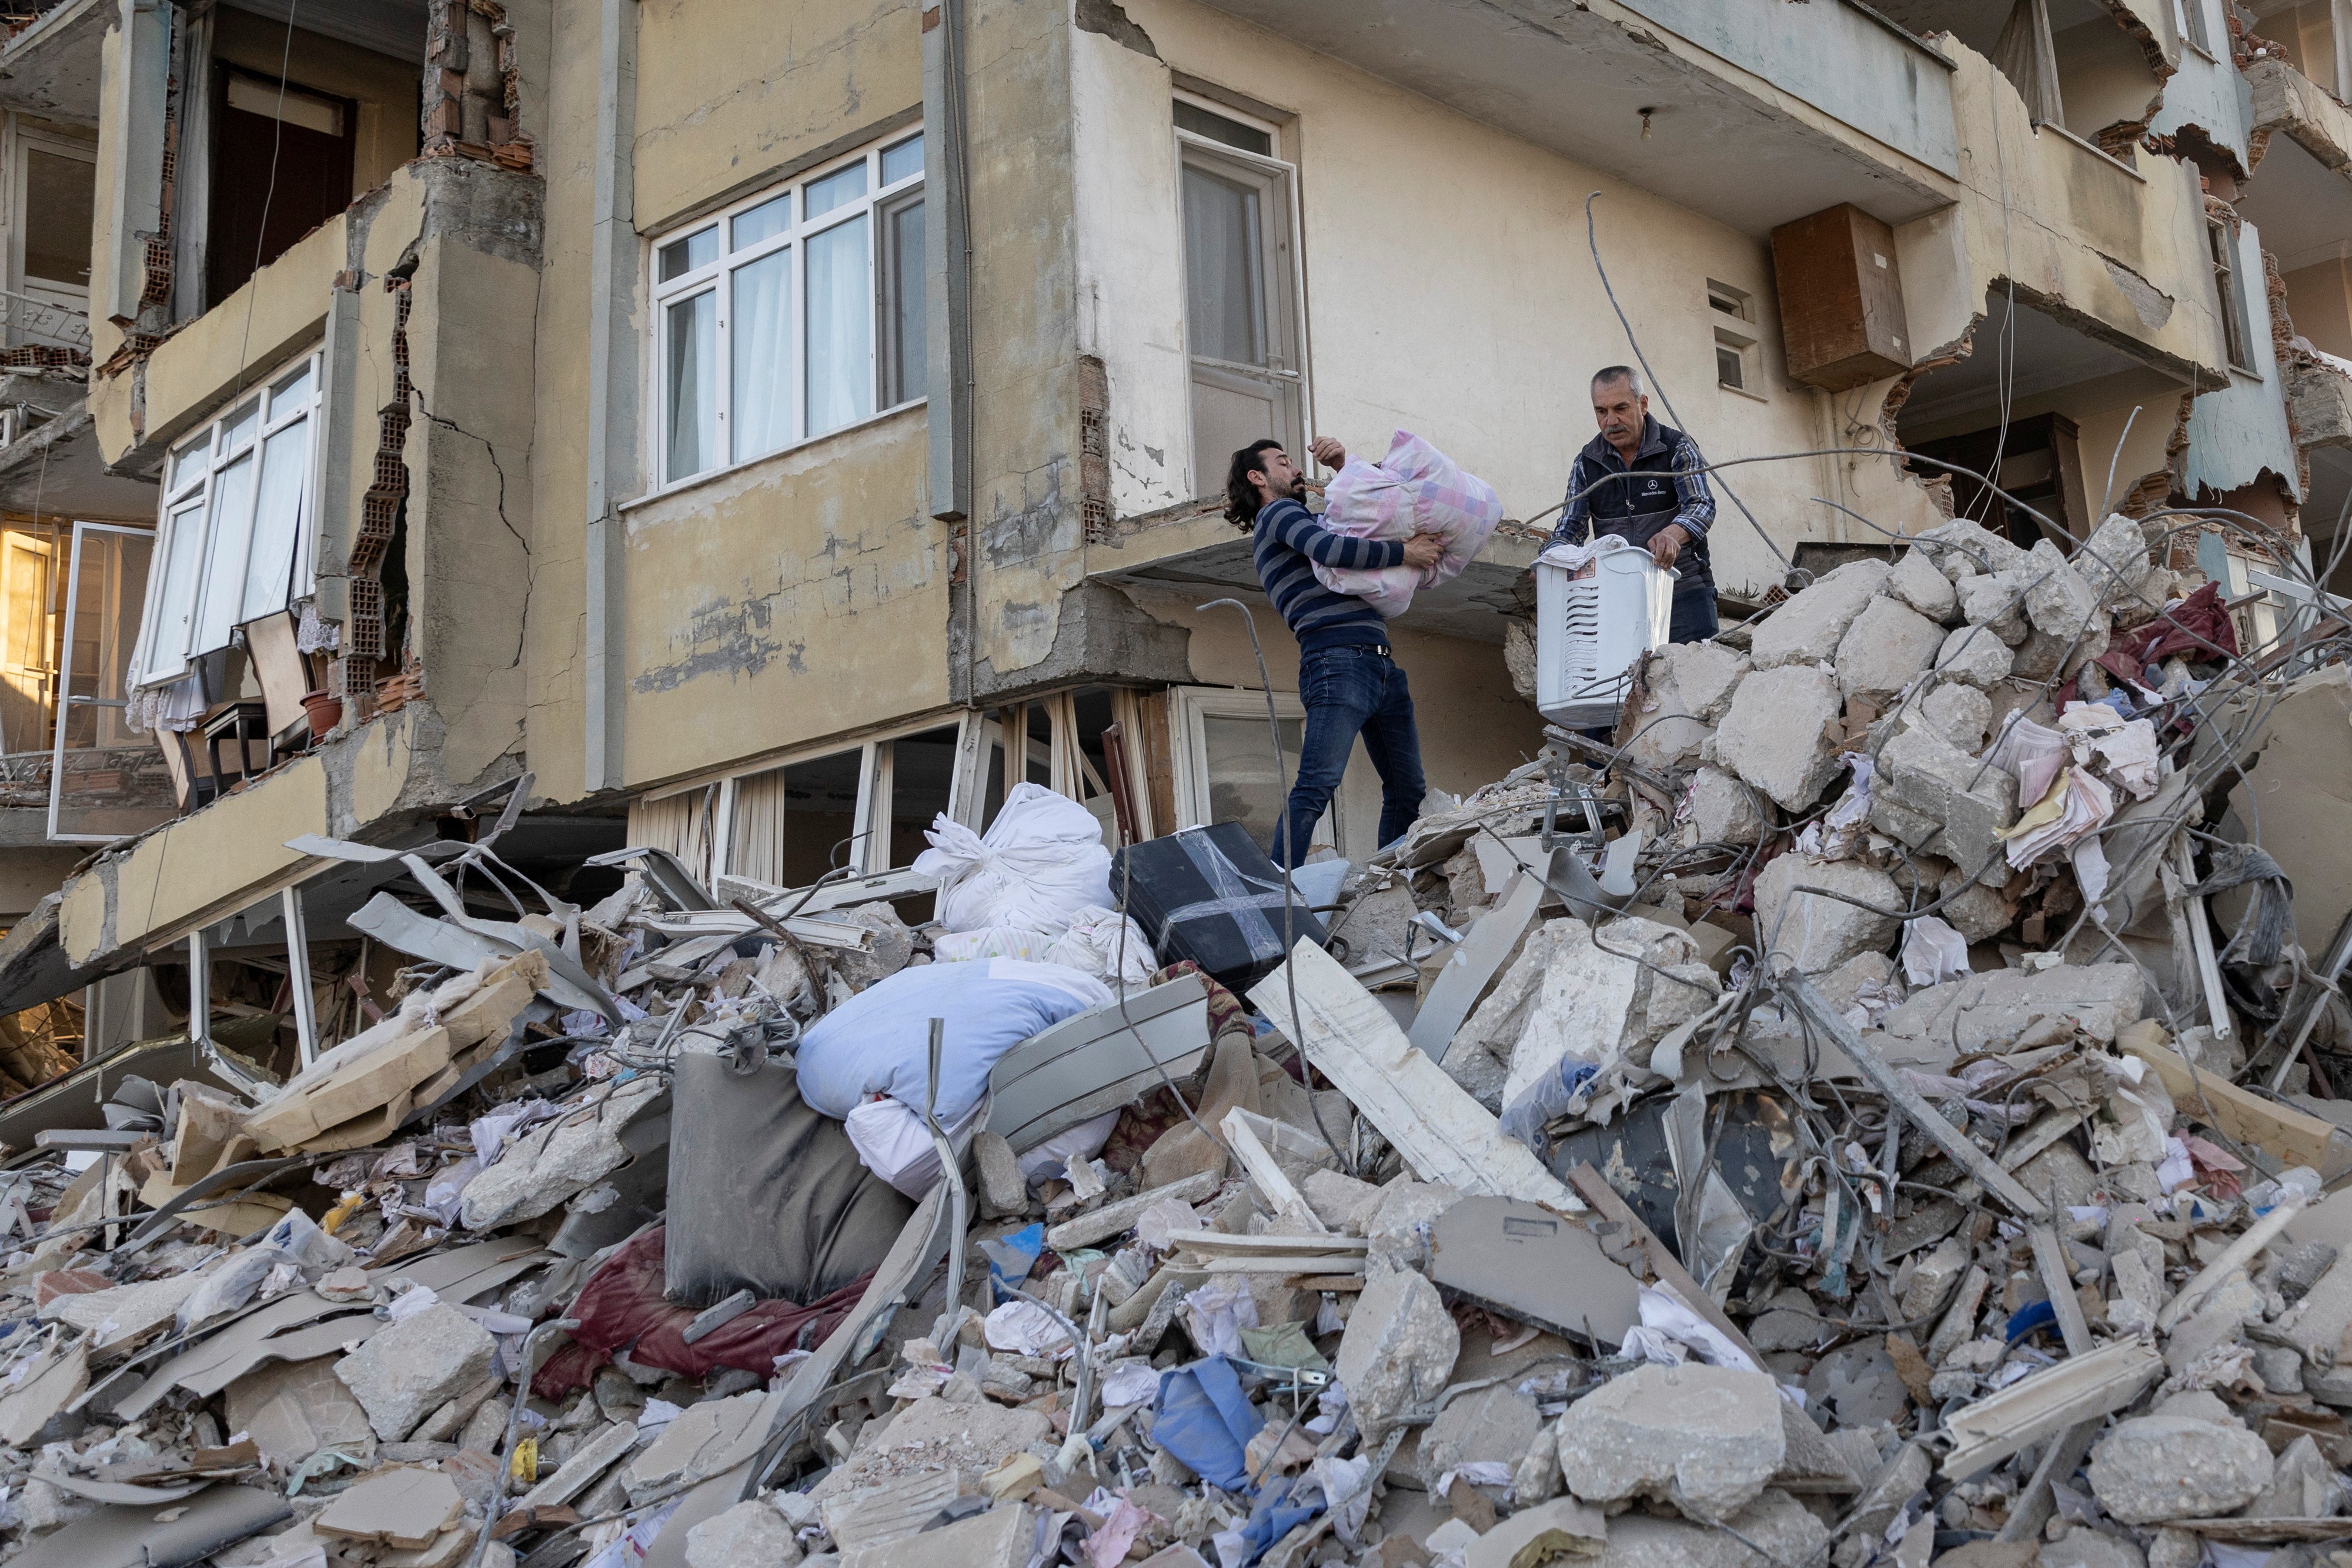 Arsin and his father take belongings out of their destroyed apartment in the aftermath of the deadly earthquake in Antakya, Hatay province, Turkey, February 20, 2023. Photo: Reuters